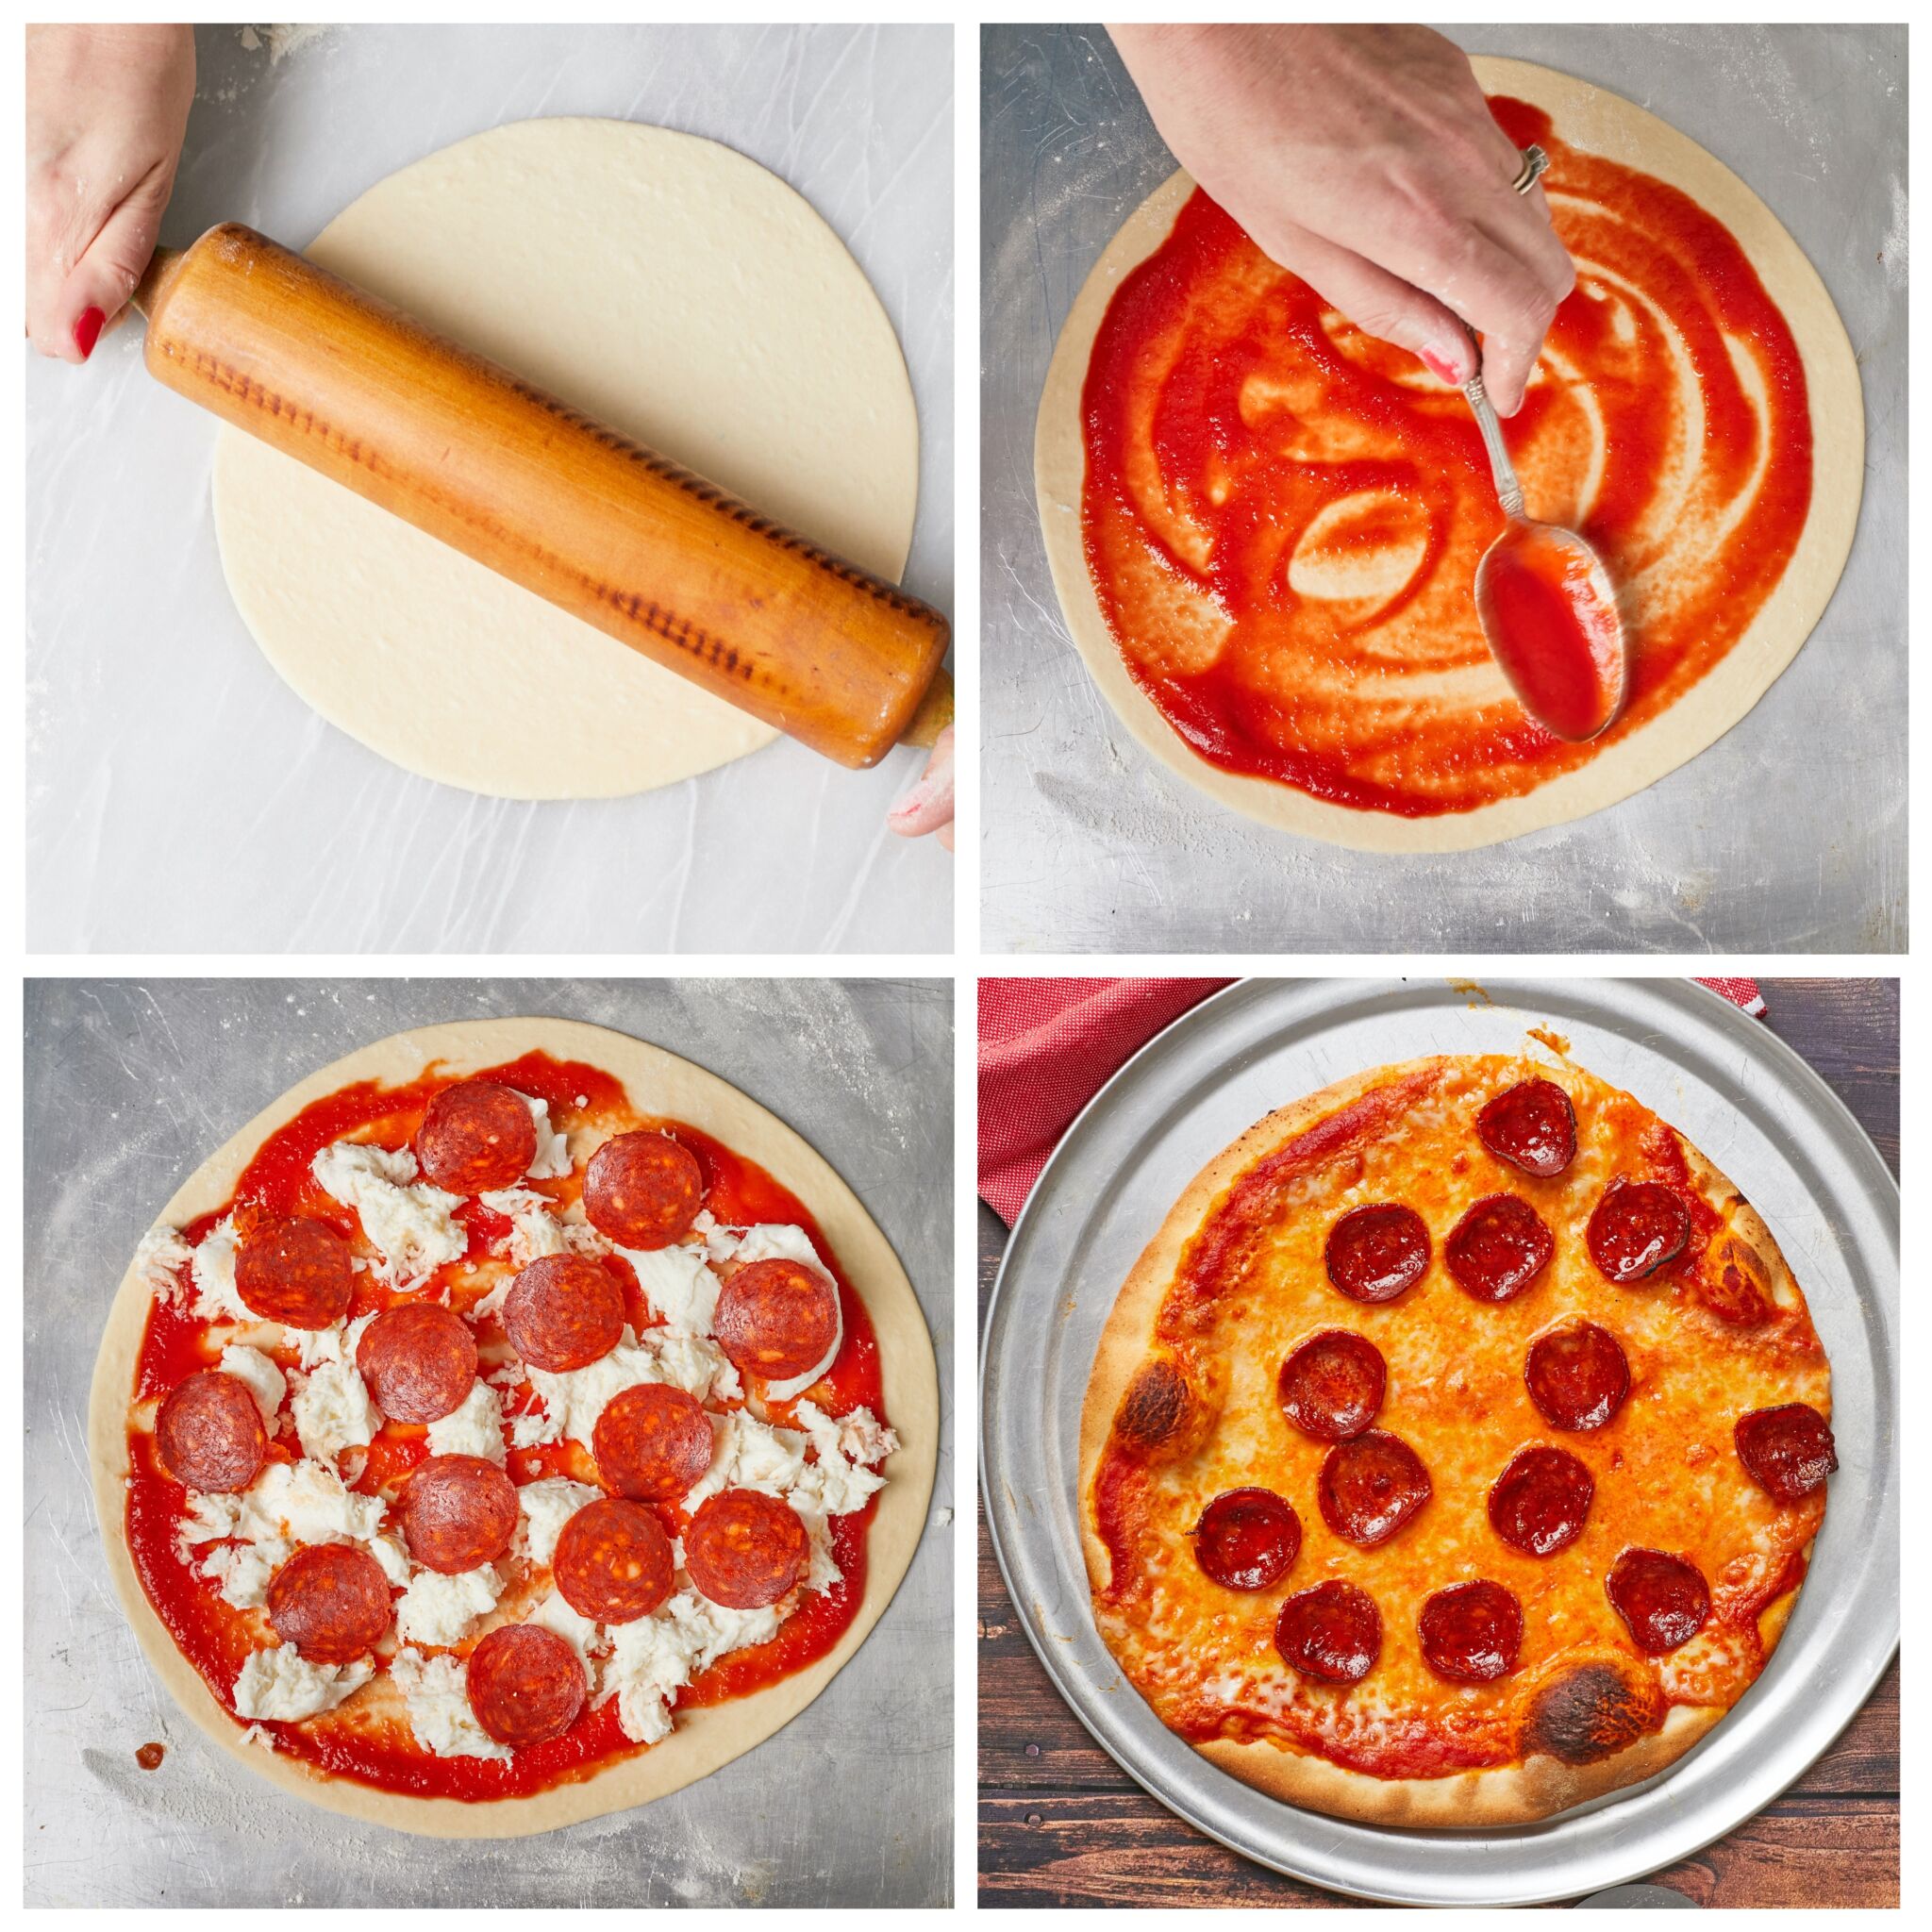 Instructions on shaping and assembling the Easiest pizza. Roll one dough ball out on a lightly-floured surface, then spread on red pizza sauce, followed by fresh mozzarella and pepperonis. Bake until the crust is crispy and cheese is toasty on the edges.